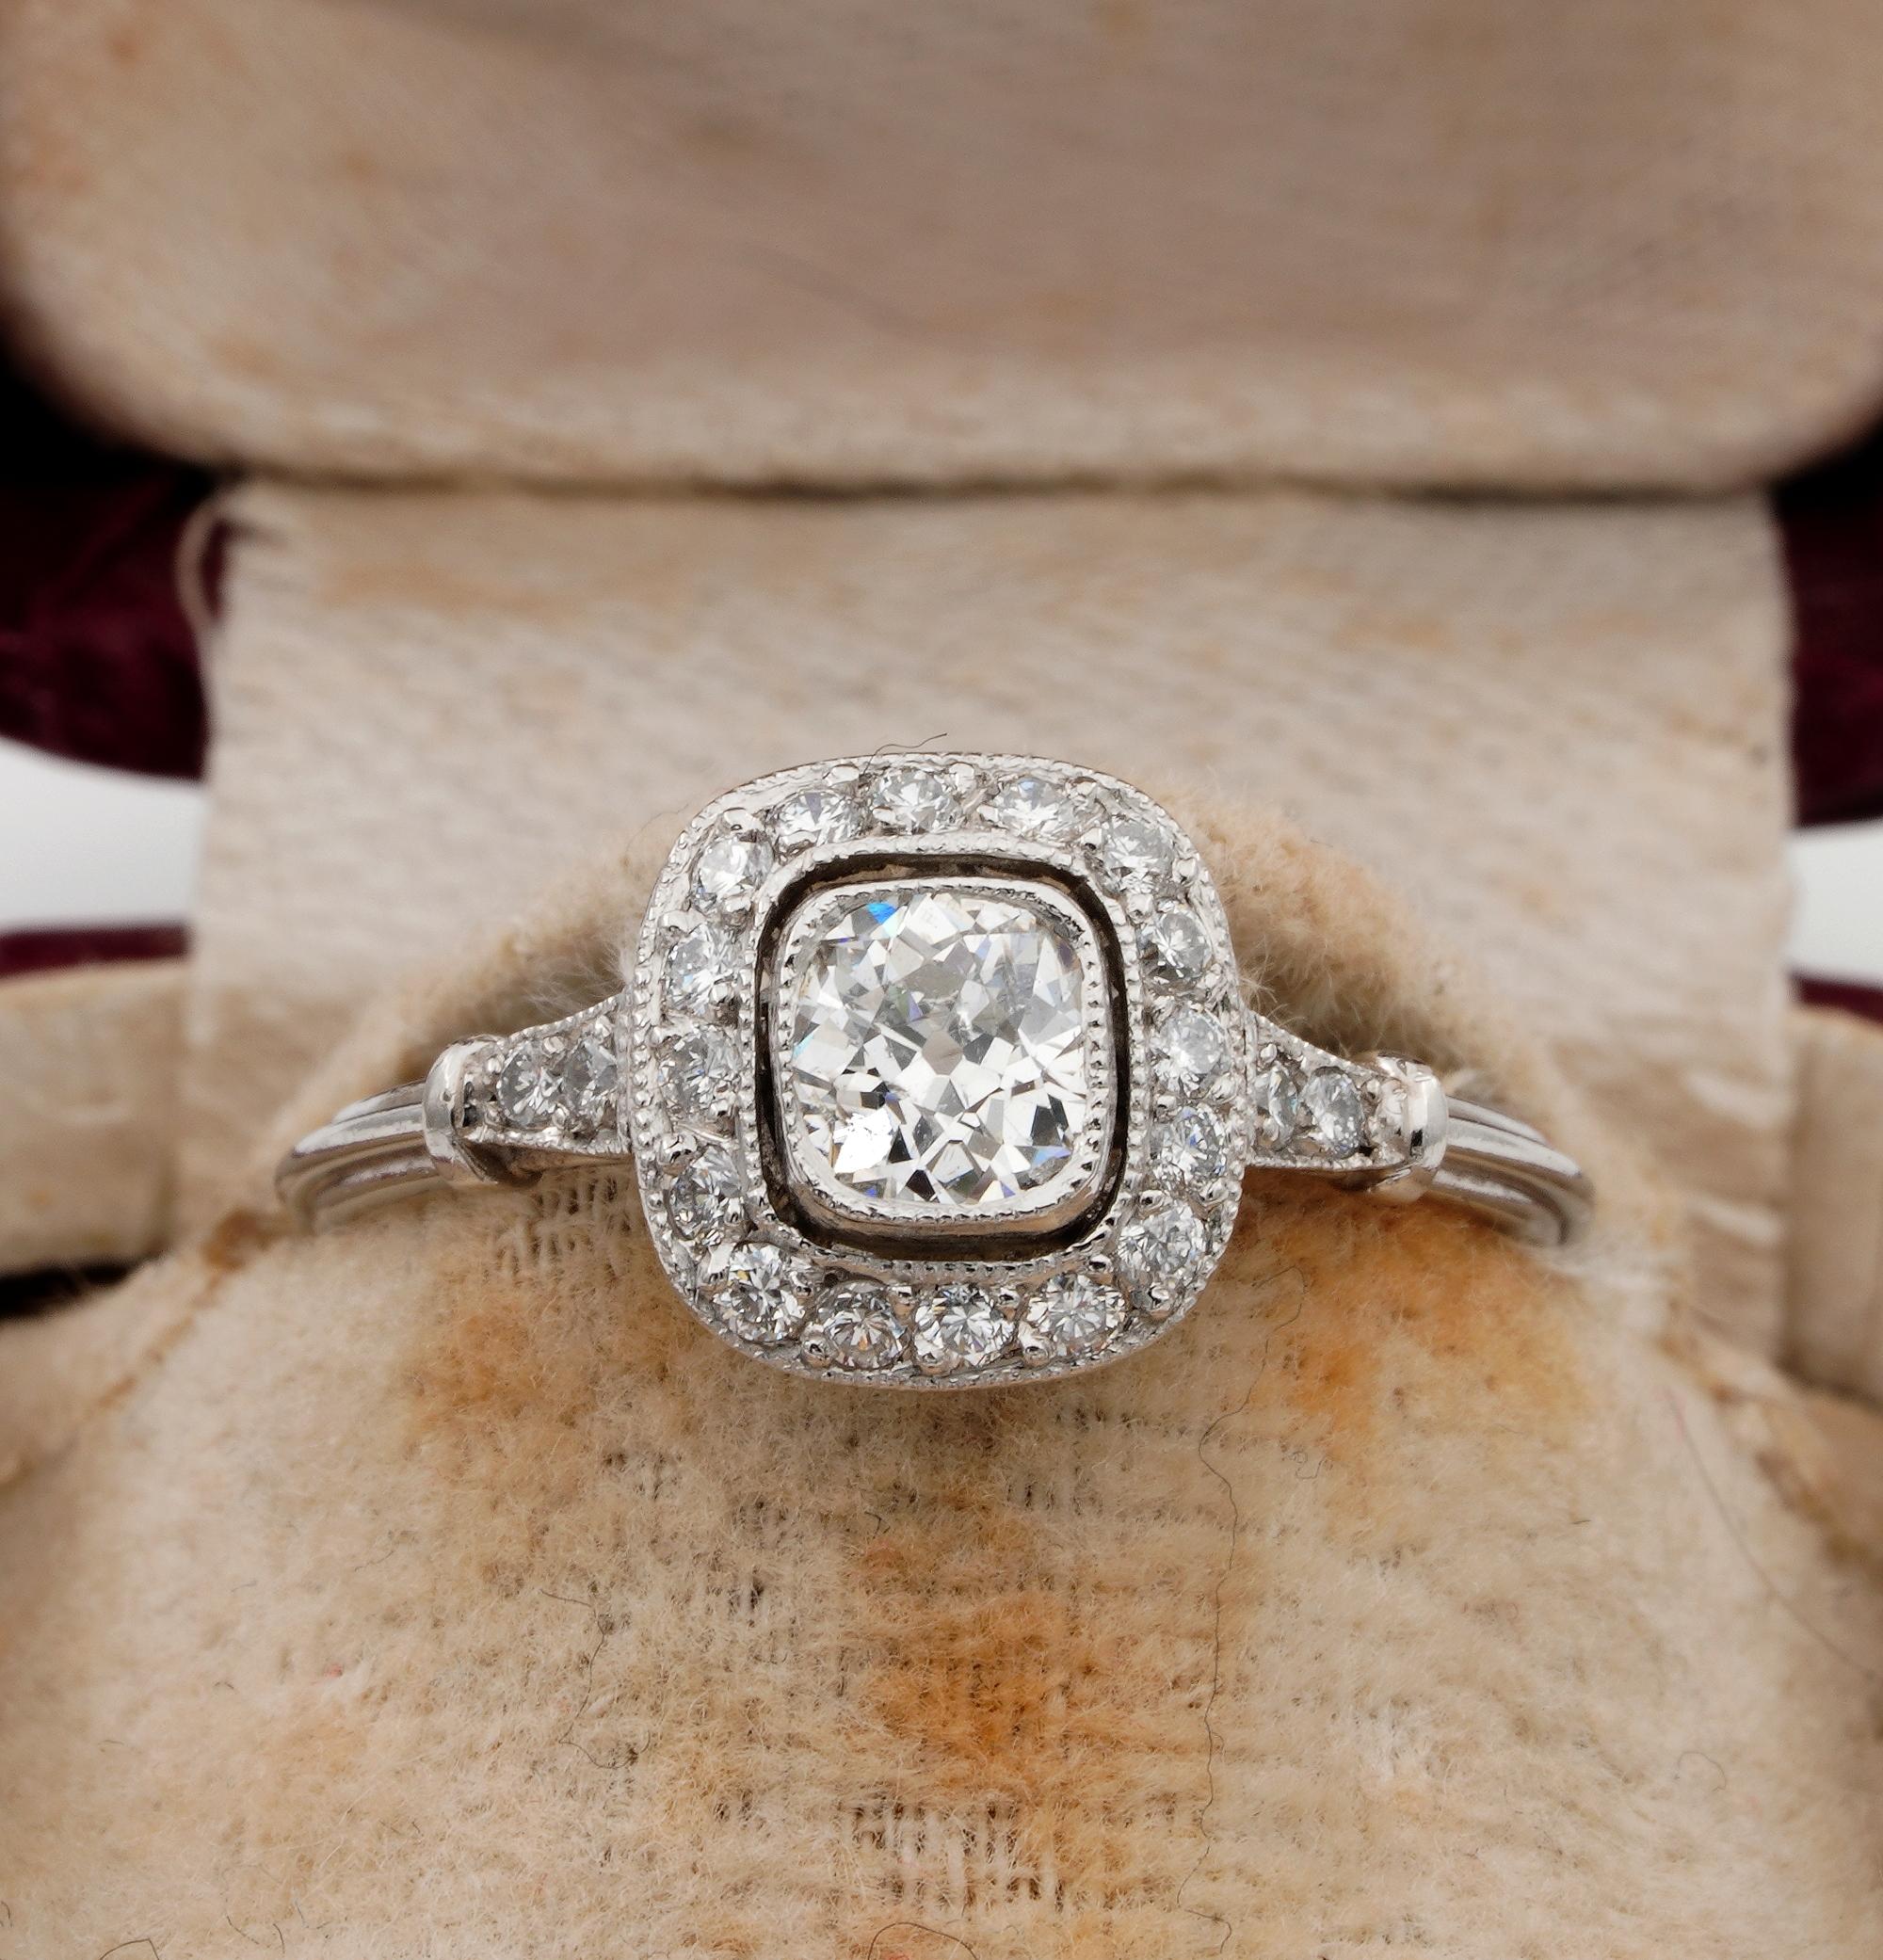 Diamond Target
This fantastic Diamond solitaire ring has been hand fabricated in solid Platinum, following the highest standards of crafting in a classy traditional target design Art Deco style
Centrally set with a beautiful, bright white and